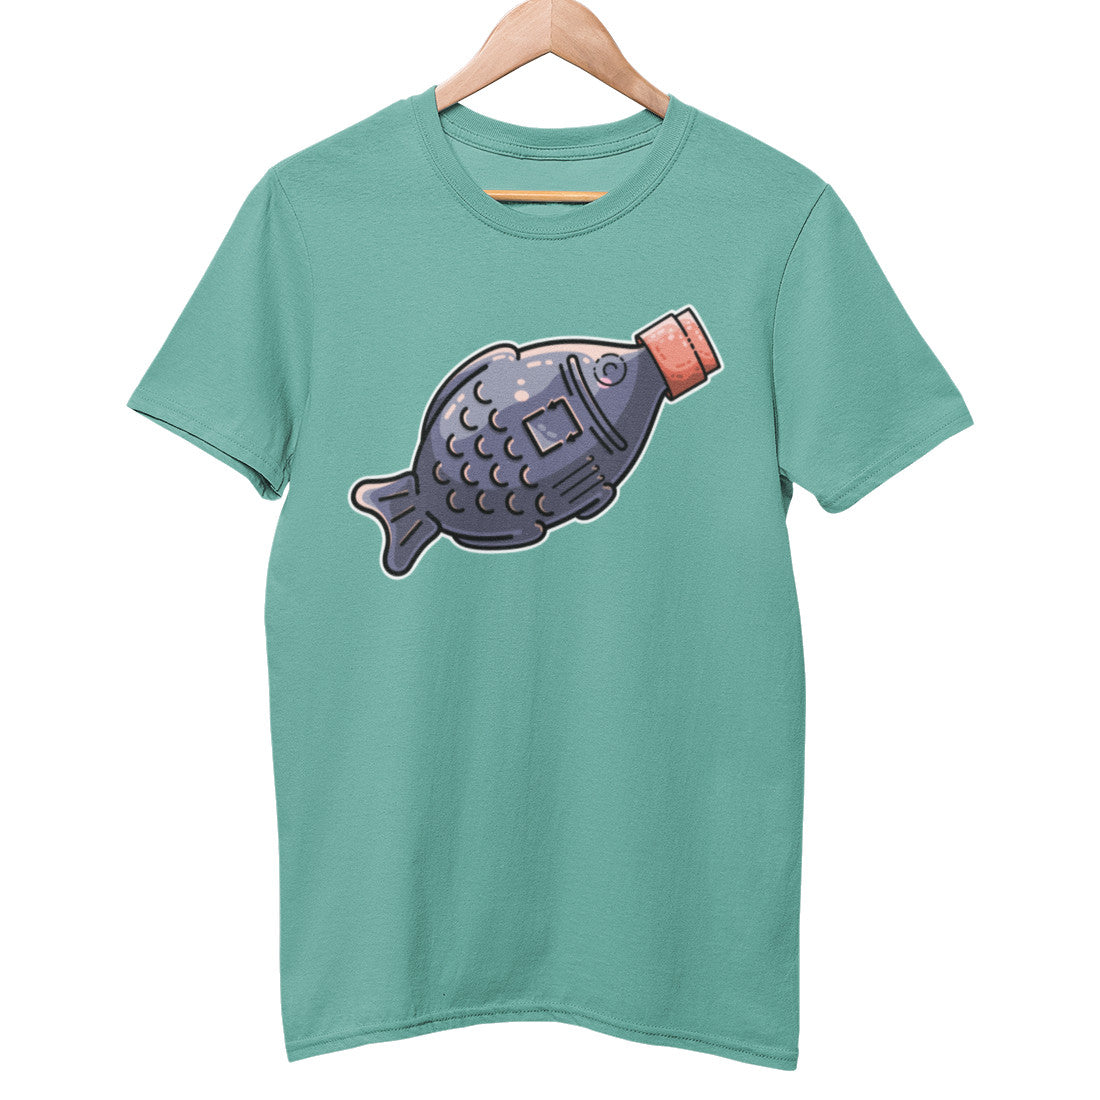 A green unisex crewneck t-shirt on a hanger with a design on its chest of a kawaii cute plastic soy fish filled with black soy sauce and with a red cap seen side on facing to the right and at a diagonal angle